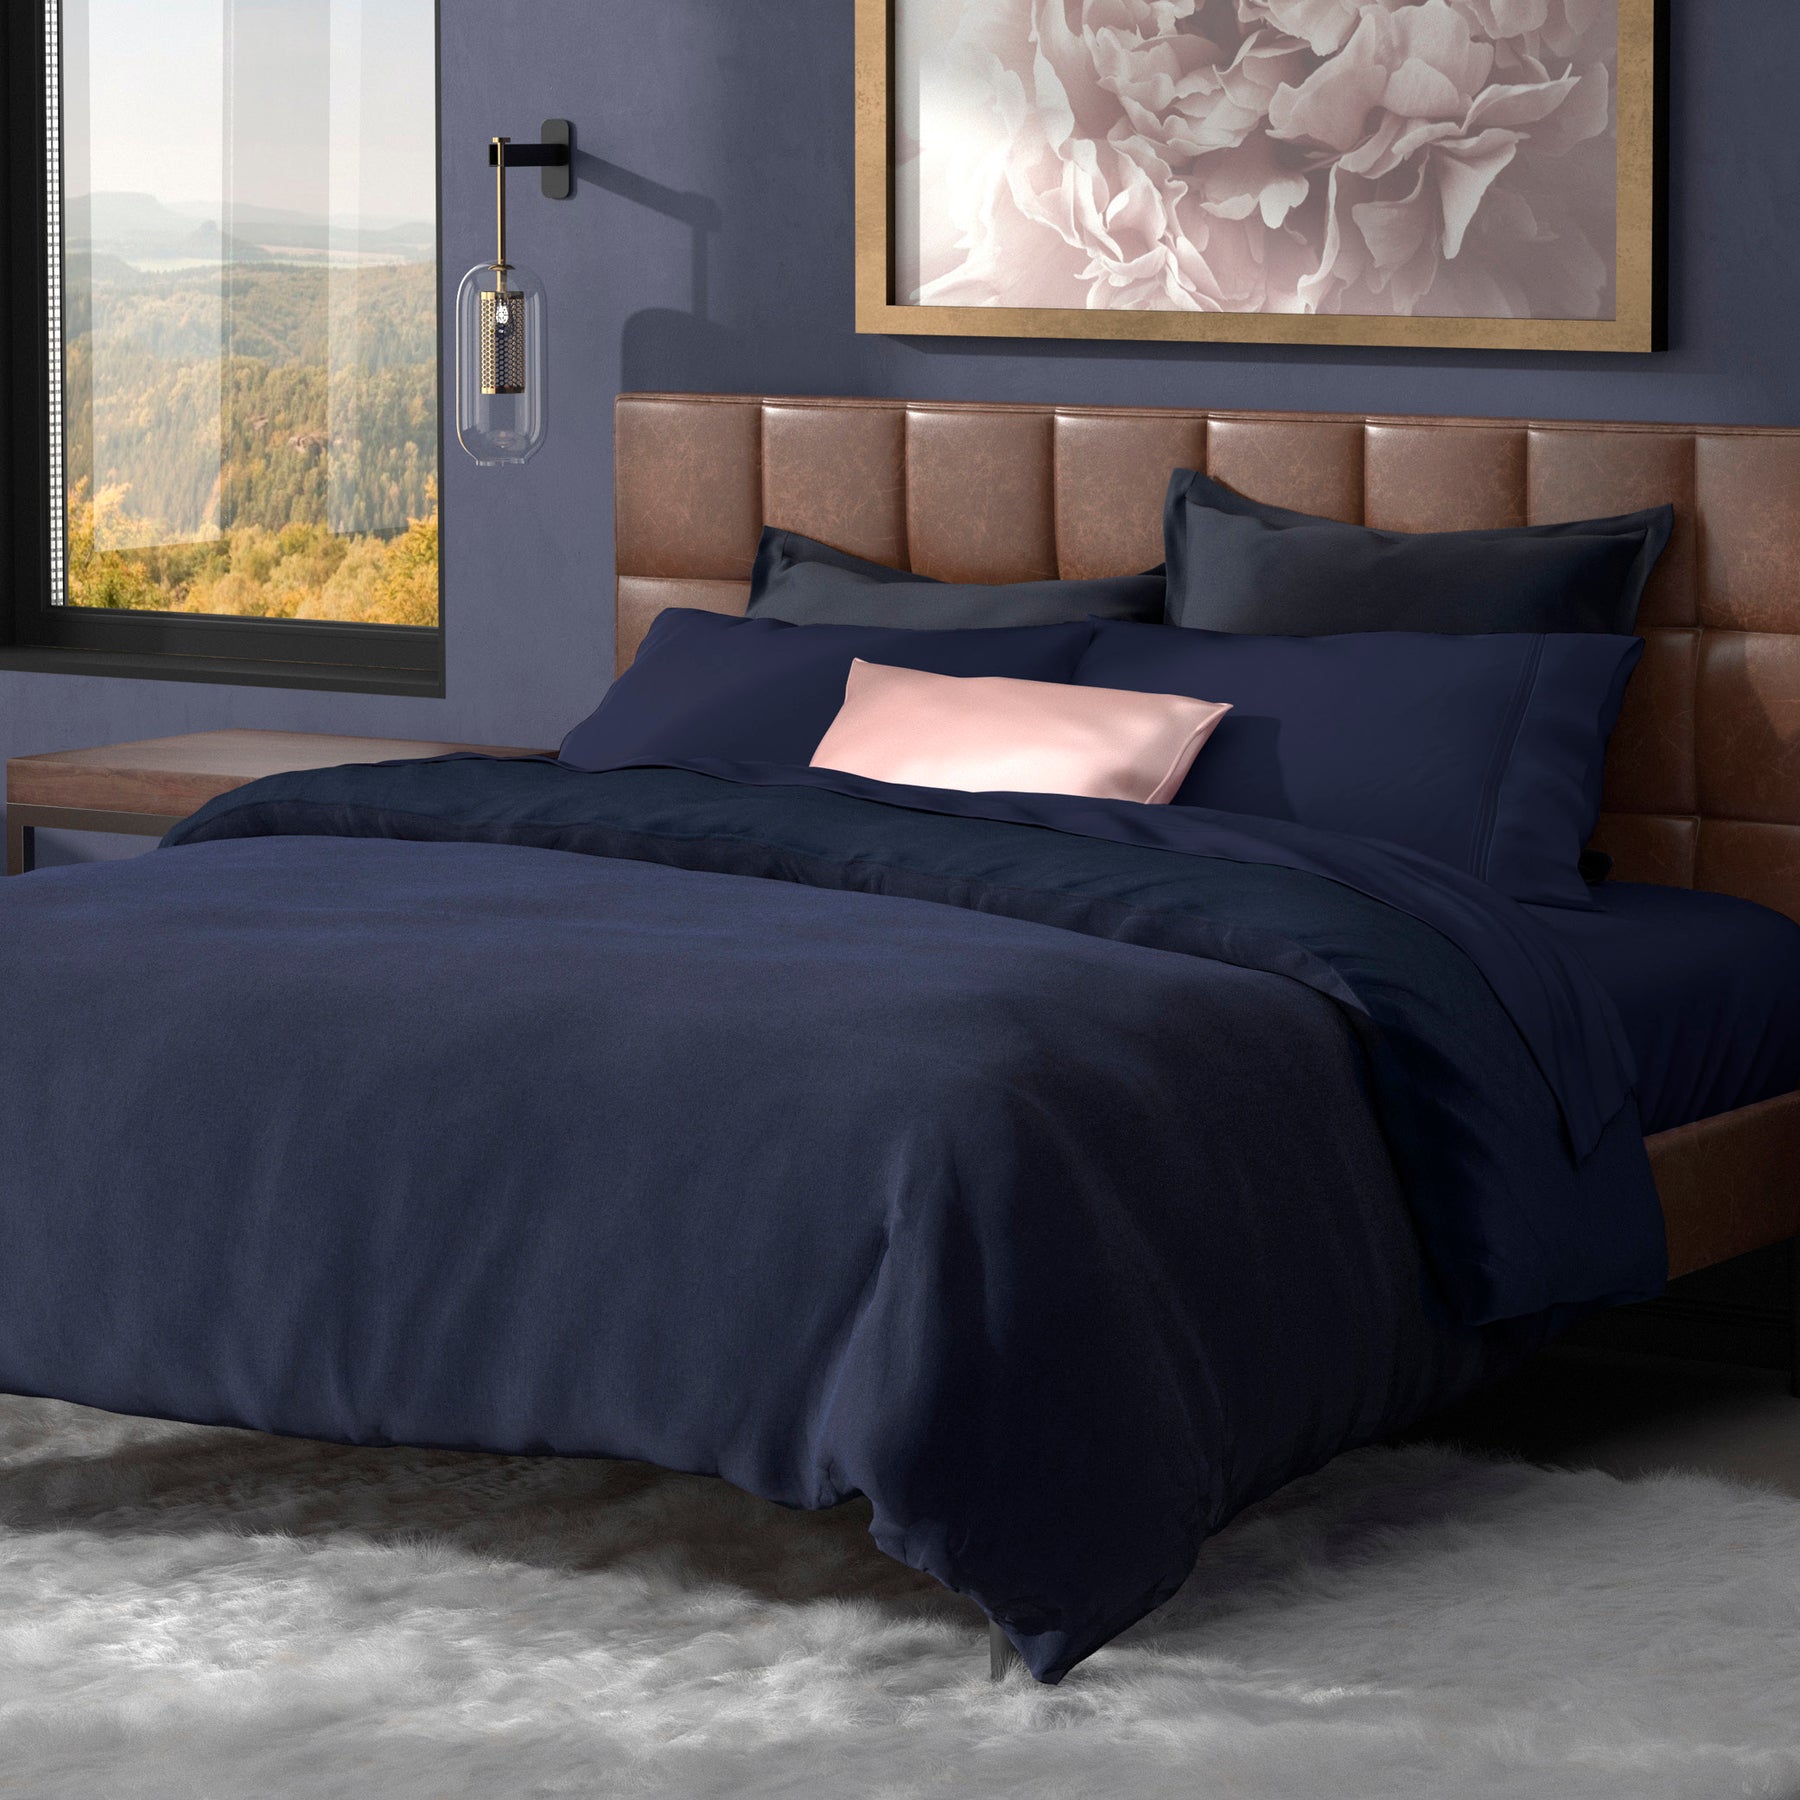 Image of a neatly made bed with the Midnight Soft Touch Bundle 